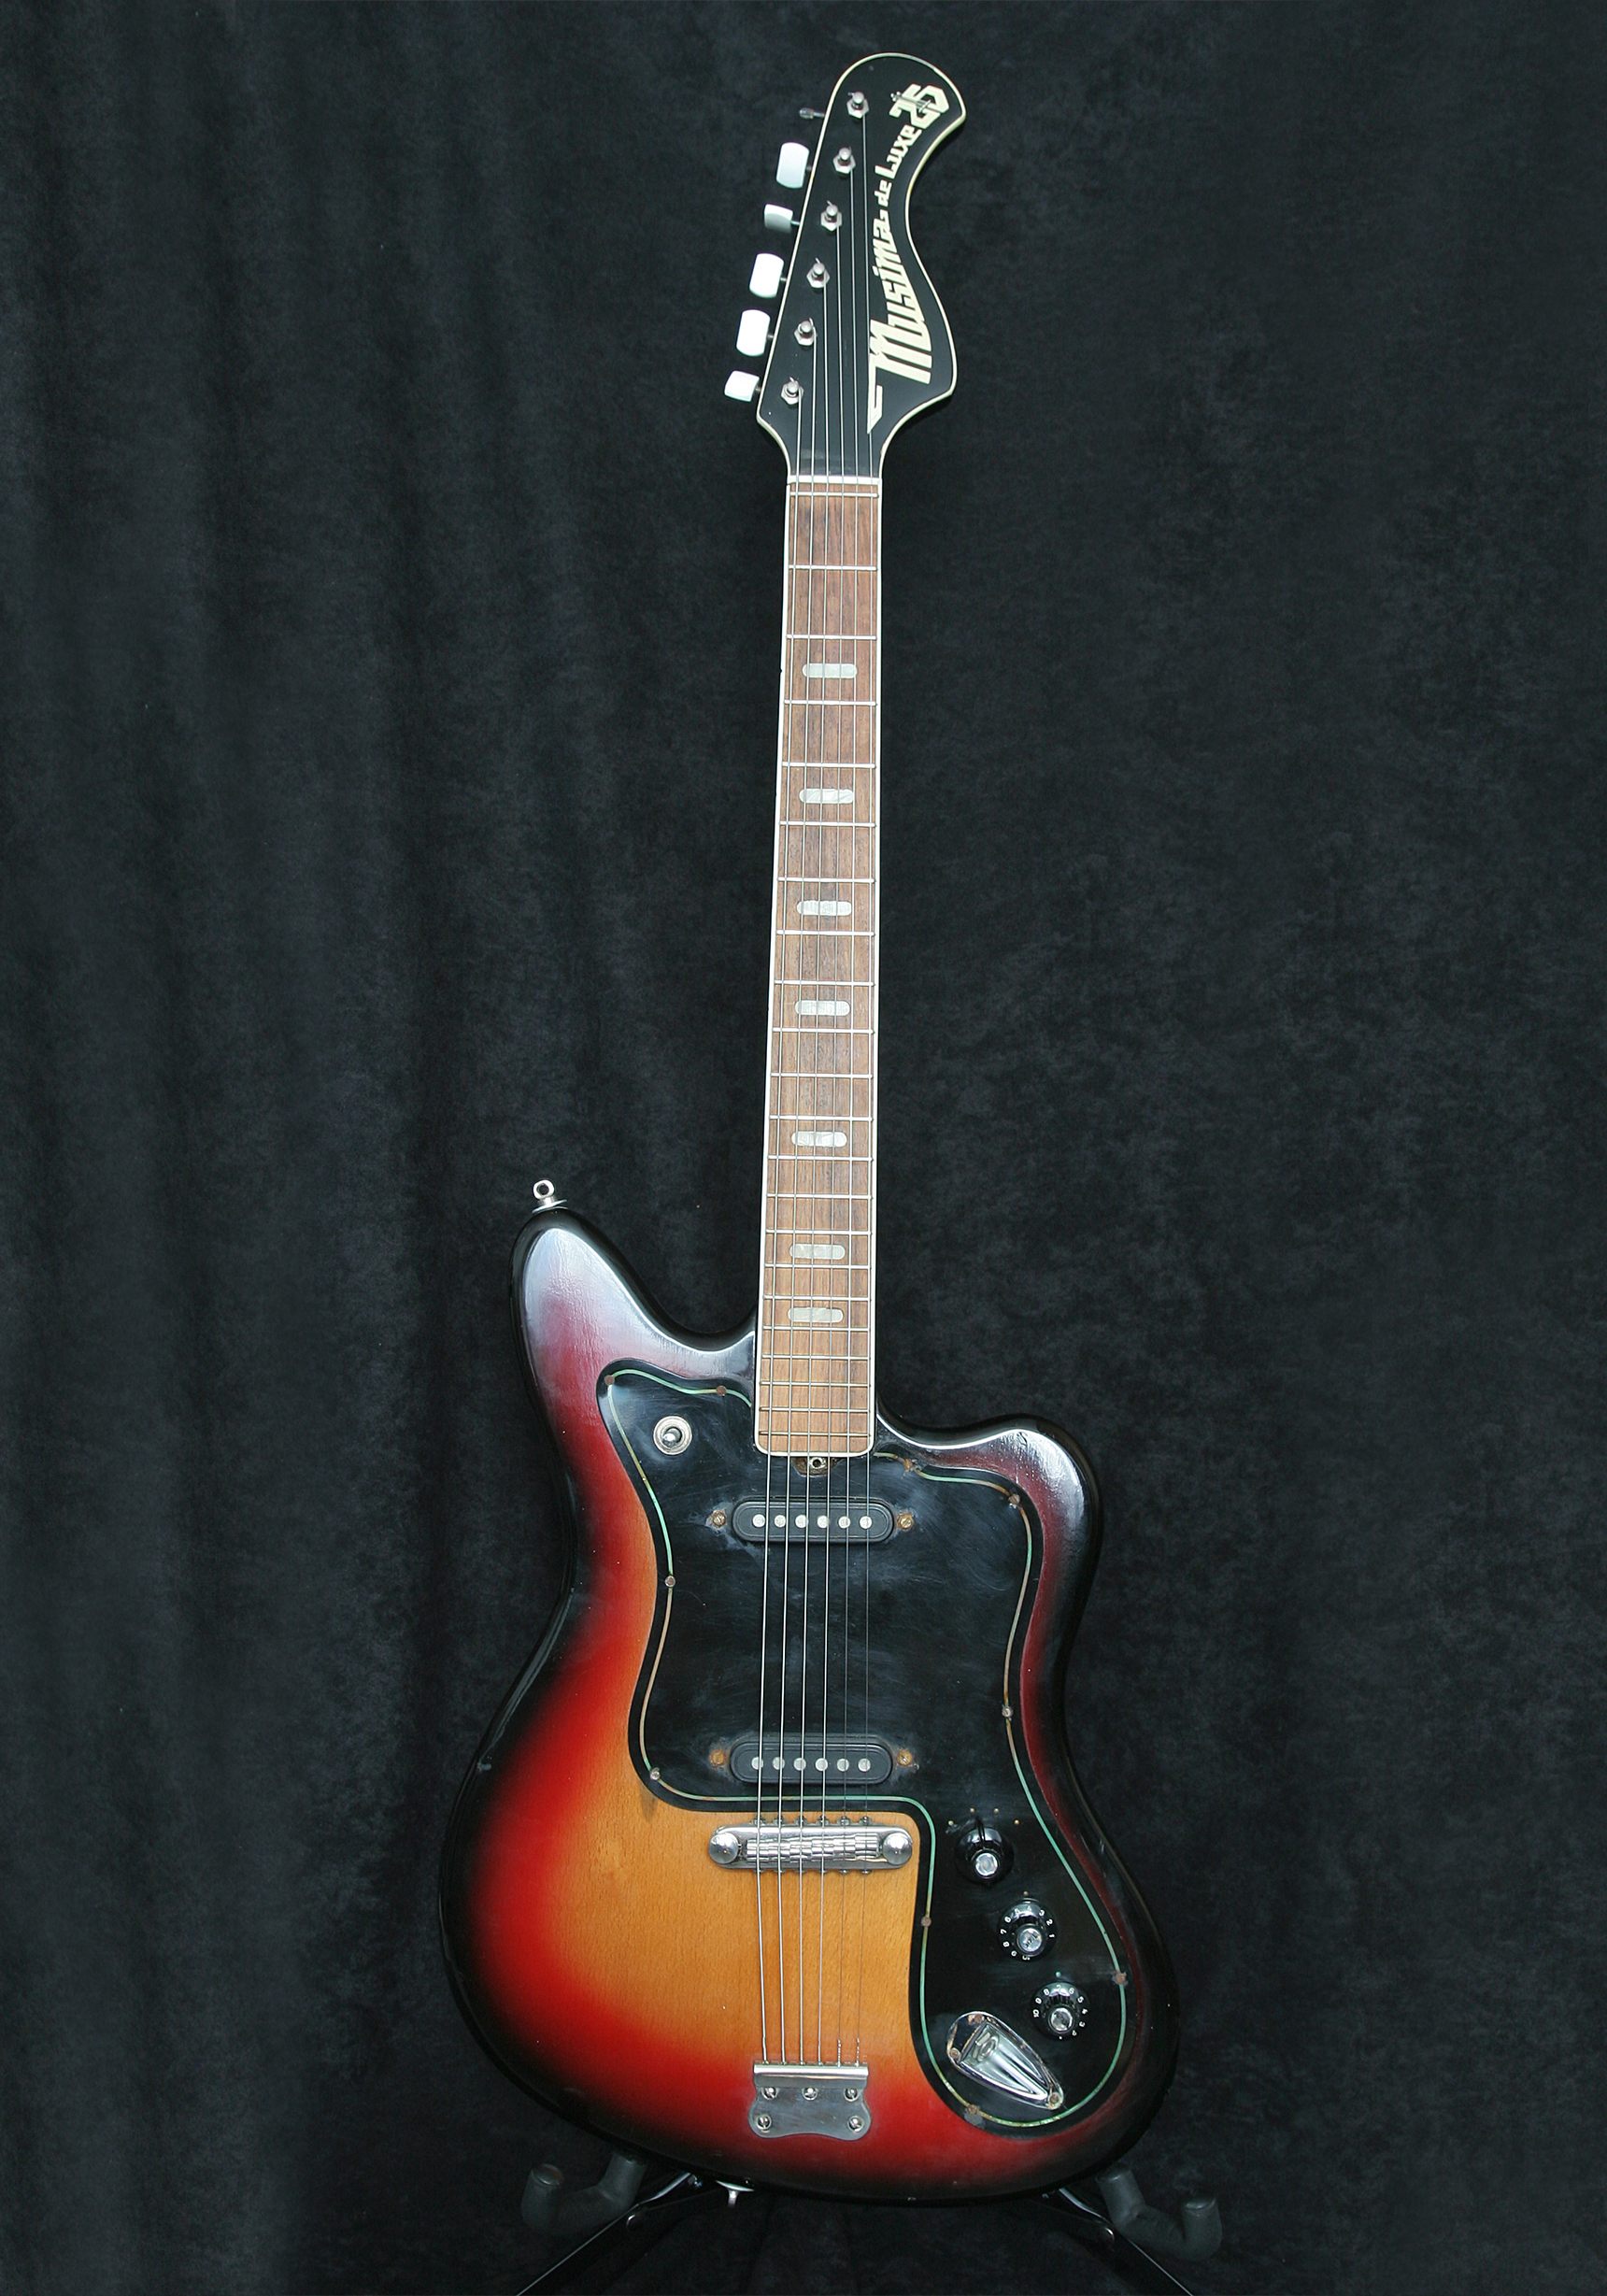 Explosives Cardinal Withdrawal Musima Deluxe 25, 1960's, Sunburst, made in Germany – Reforged Guitars